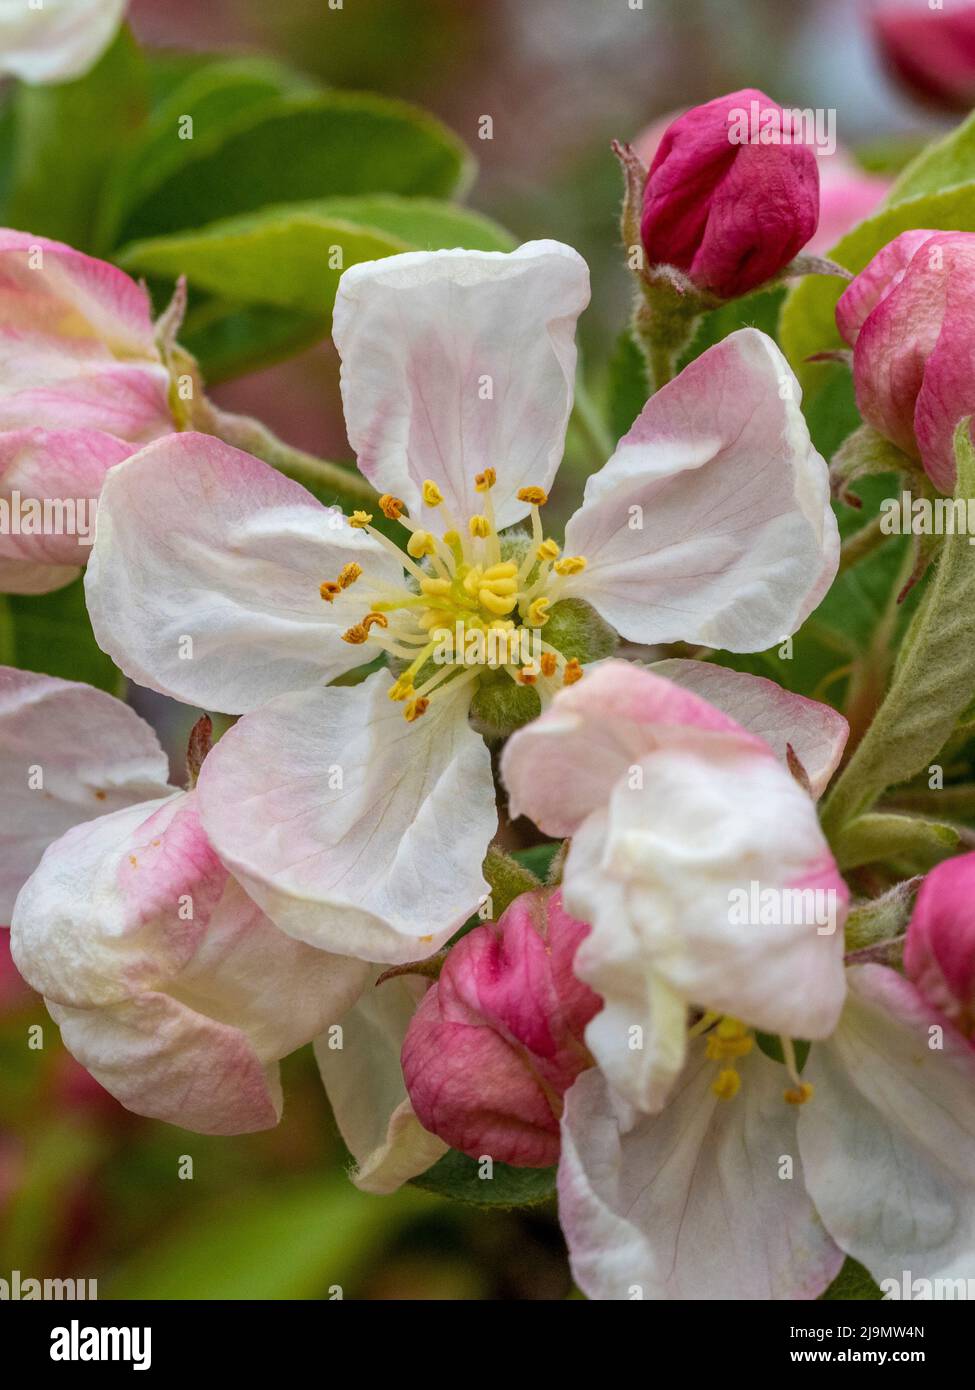 White tinged with pink blossom on crab apple tree. Malus 'Evereste' Stock Photo